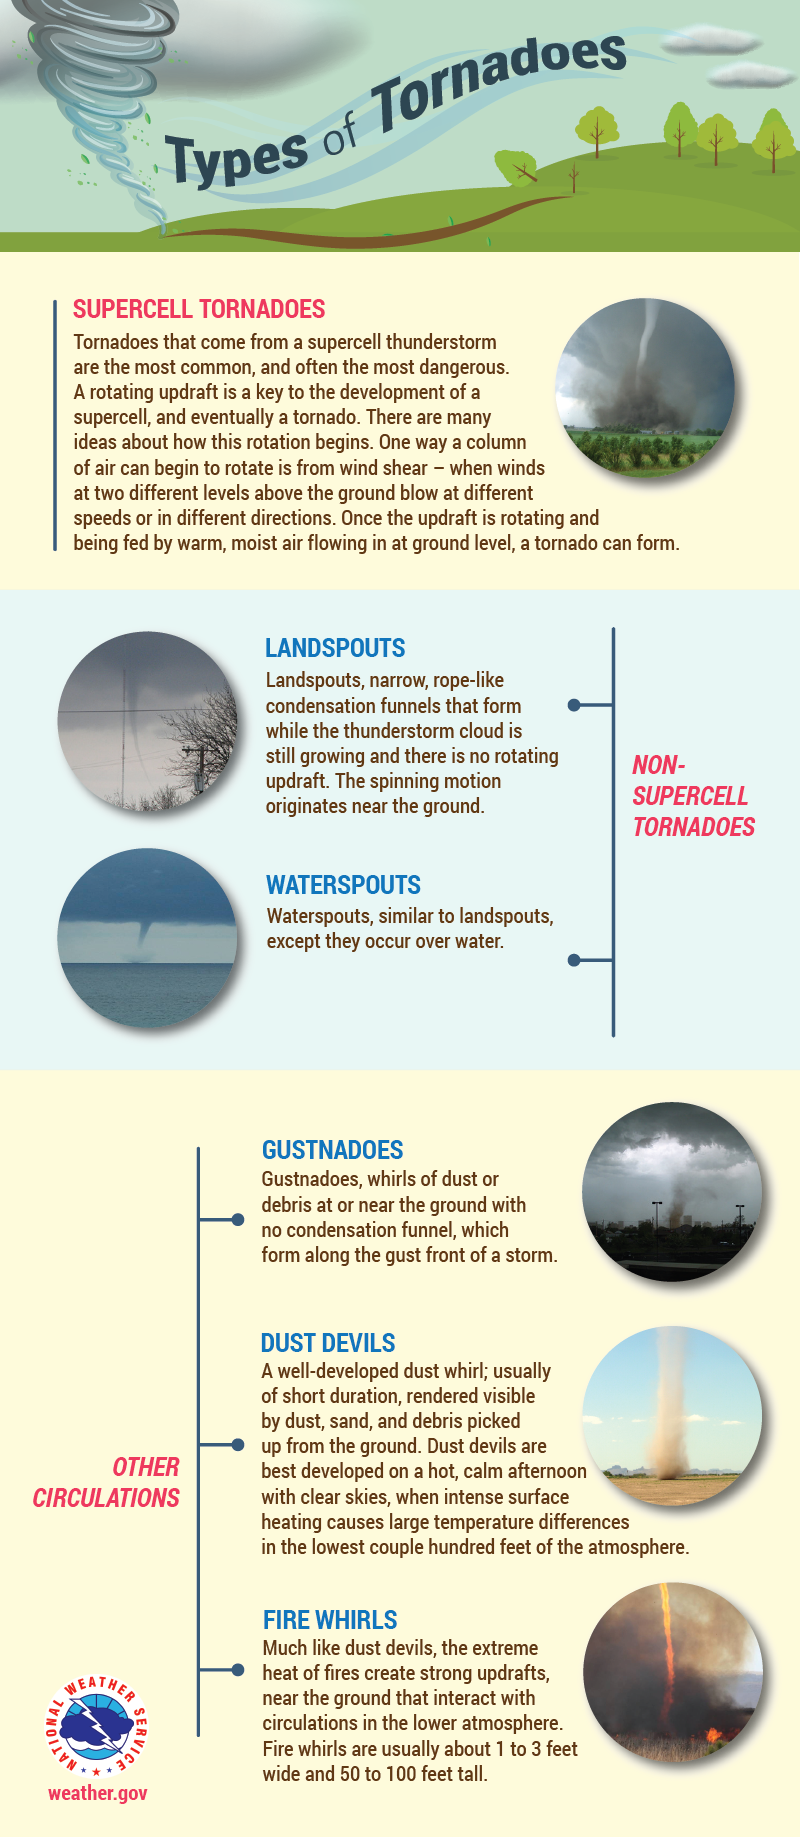 TYPES OF TORNADOES -Supercell Tornadoes:Tornadoes that come from a supercell thunderstorm are the most common, and often the most dangerous. A rotating updraft is a key to the development of a supercell, and eventually a tornado. There are many ideas about how this rotation begins. One way a column of air can begin to rotate is from wind shear – when winds at two different levels above the ground blow at different speeds or in different directions. Once the updraft is rotating and being fed by warm, moist air flowing in at ground level, a tornado can form.Landspouts:Landspouts, narrow, rope-like condensation funnels that form while the thunderstorm cloud is still growing and there is no rotating updraft. The spinning motion originates near the ground.Waterspouts:Waterspouts, similar to landspouts, except they occur over water.Gustnadoes:Gustnadoes, whirls of dust or debris at or near the ground with no condensation funnel, which form along the gust front of a storm.Dust Devils:A well-developed dust whirl; usually of short duration, rendered visible by dust, sand, and debris picked up from the ground. Dust devils are best developed on a hot, calm afternoon with clear skies, when intense surface heating causes large temperature differences in the lowest couple hundred feet of the atmosphere.Fire Whirls:Much like dust devils, the extreme heat of fires create strong updrafts, near the ground that interact with circulations in the lower atmosphere. Fire whirls are usually about 1 to 3 feet  wide and 50 to 100 feet tall.